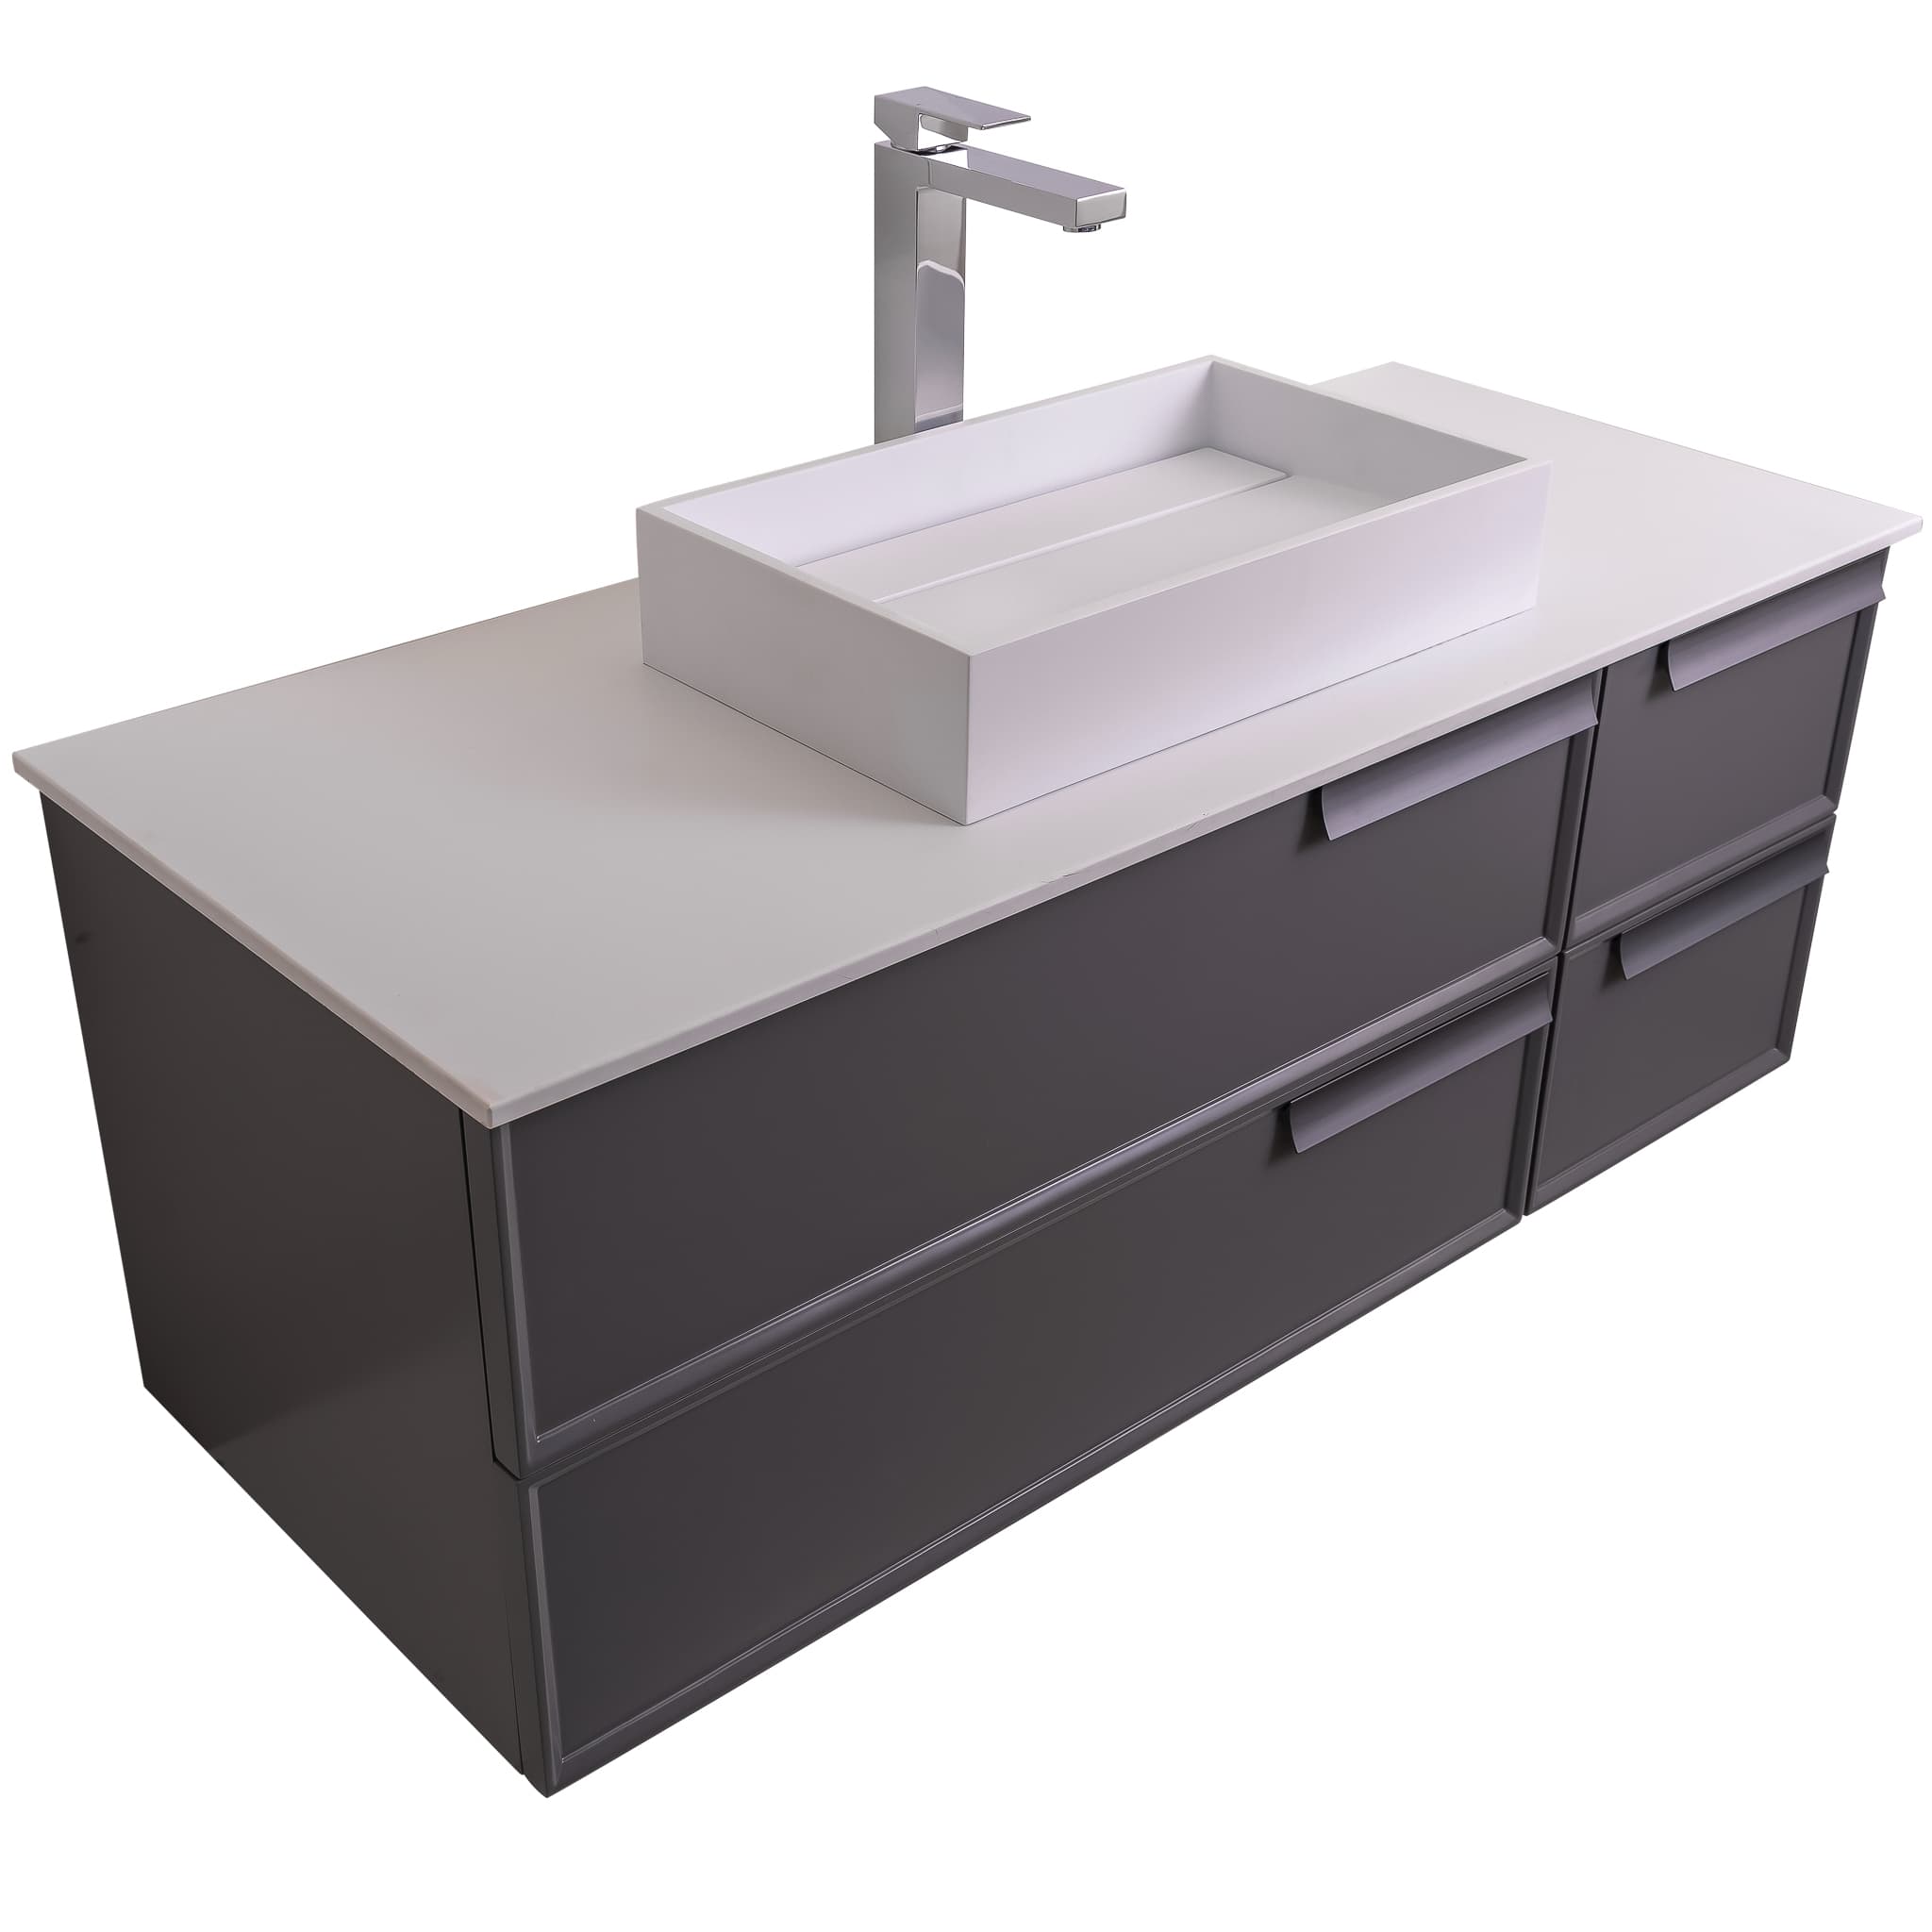 Garda 47.5 Matte Grey Cabinet, Solid Surface Flat White Counter and Infinity Square Solid Surface White Basin 1329, Wall Mounted Modern Vanity Set